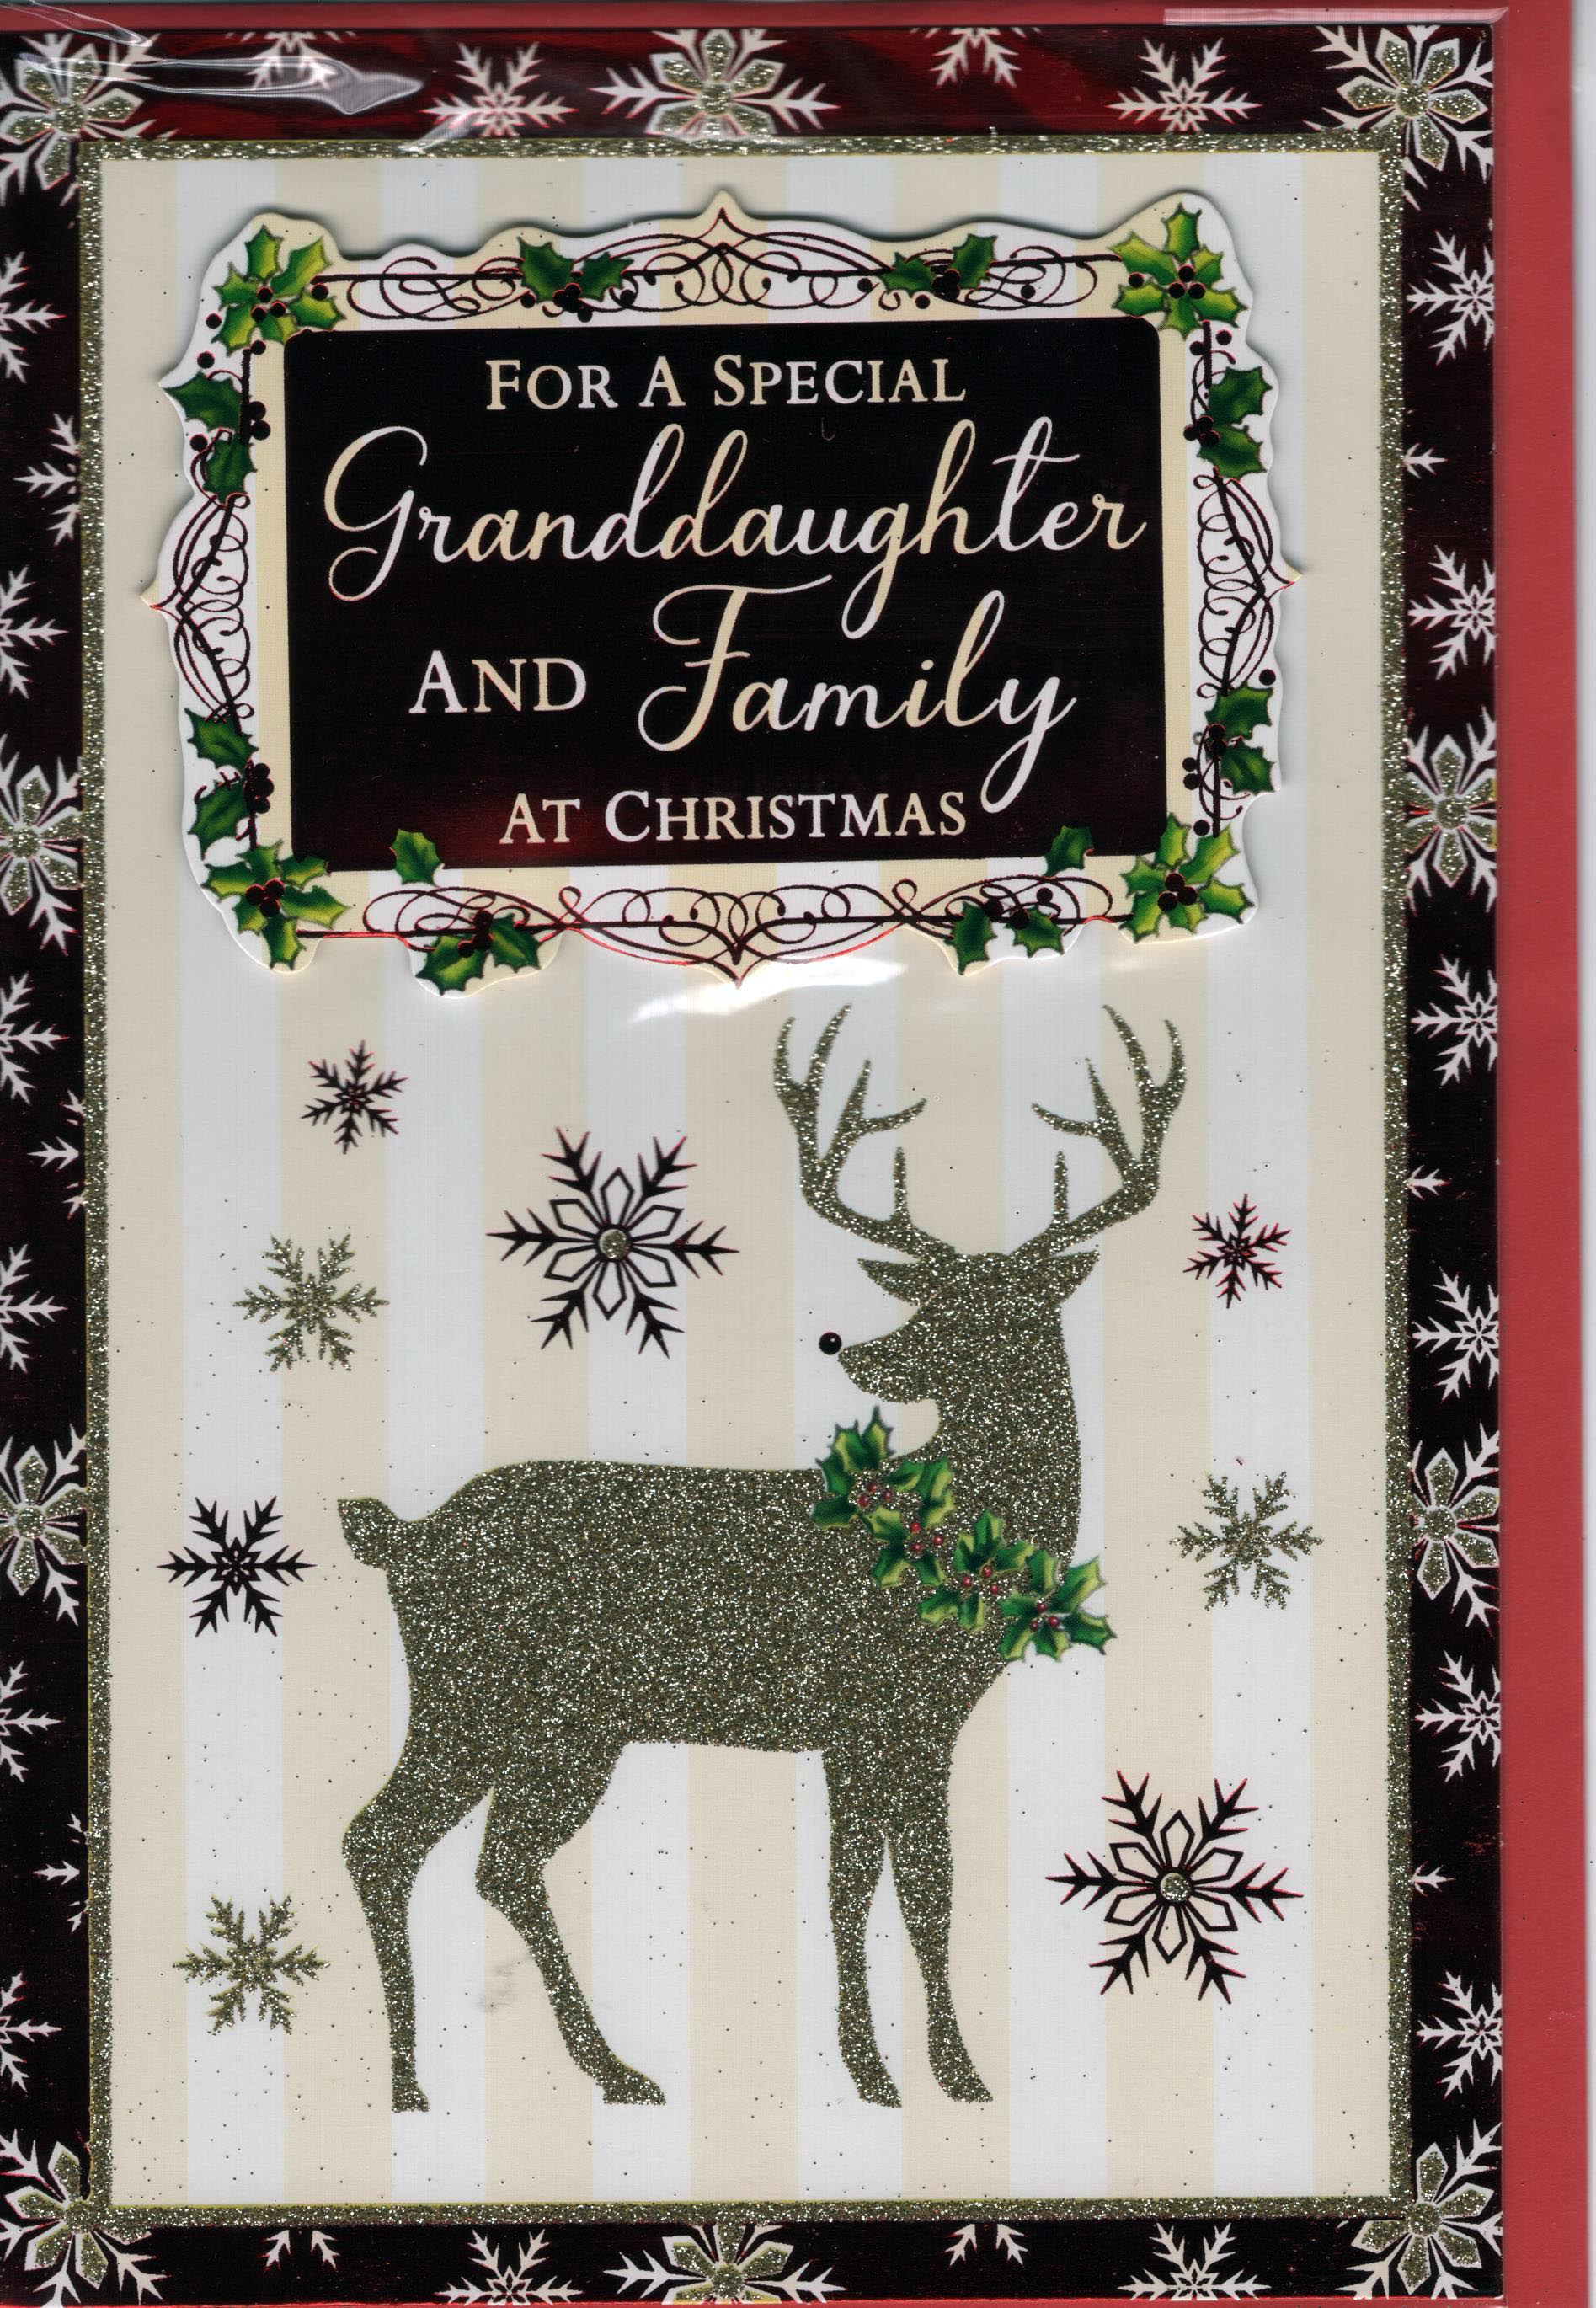 For a Special Granddaughter and Family at Christmas